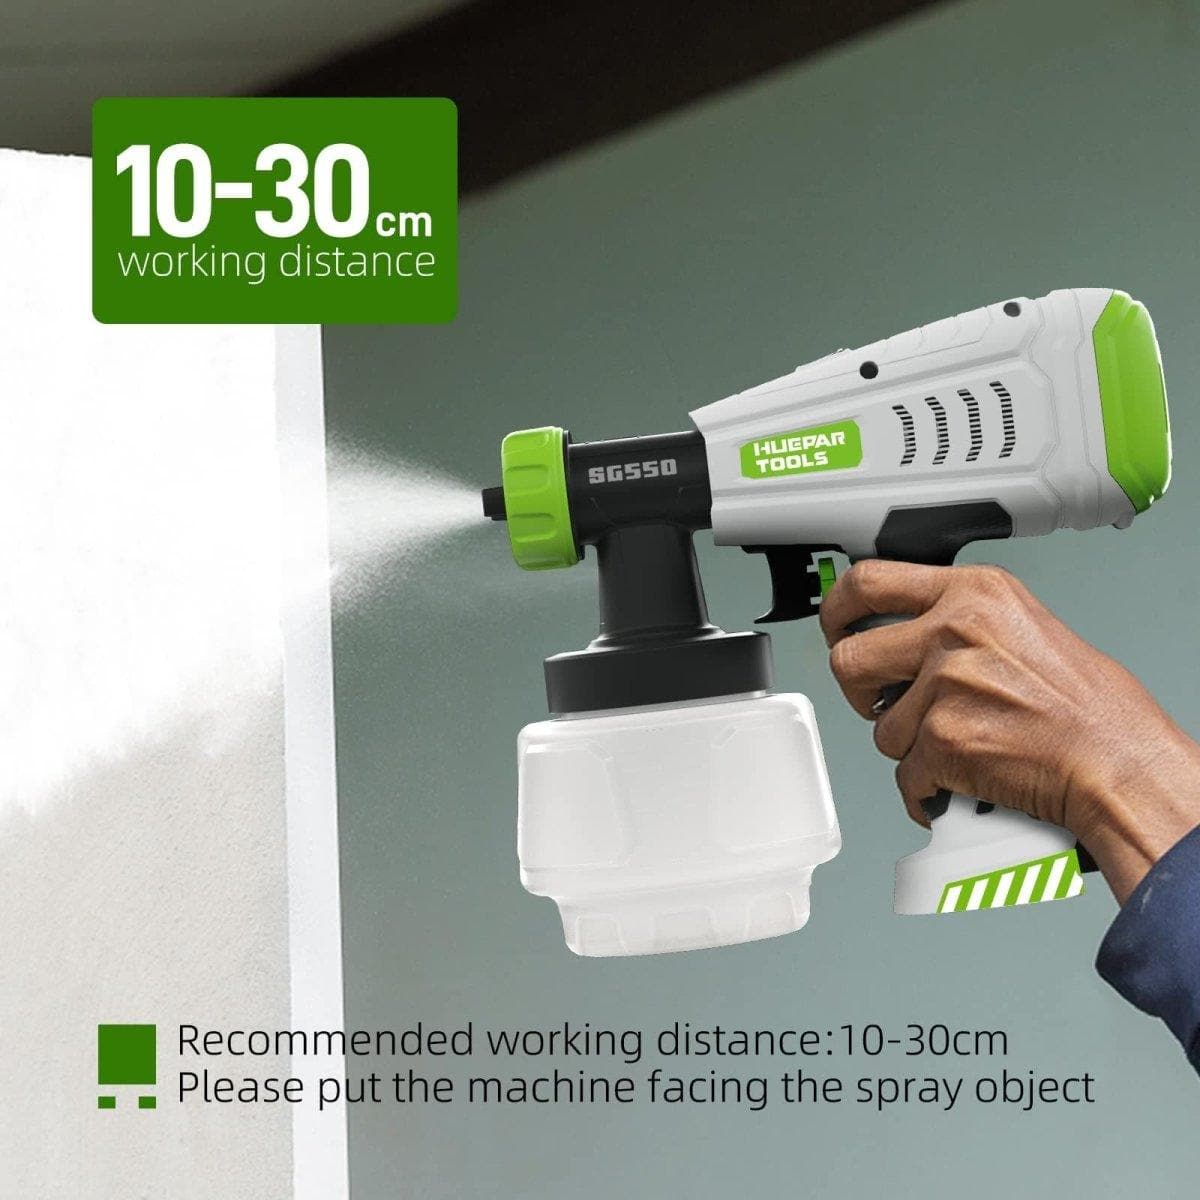 Huepar Tools SG550 HVLP electric paint sprayer with 1000ml capacity and 4 metal nozzles, 3 patterns for home interior and exterior walls, ceiling, cabinet, fence, and chair5